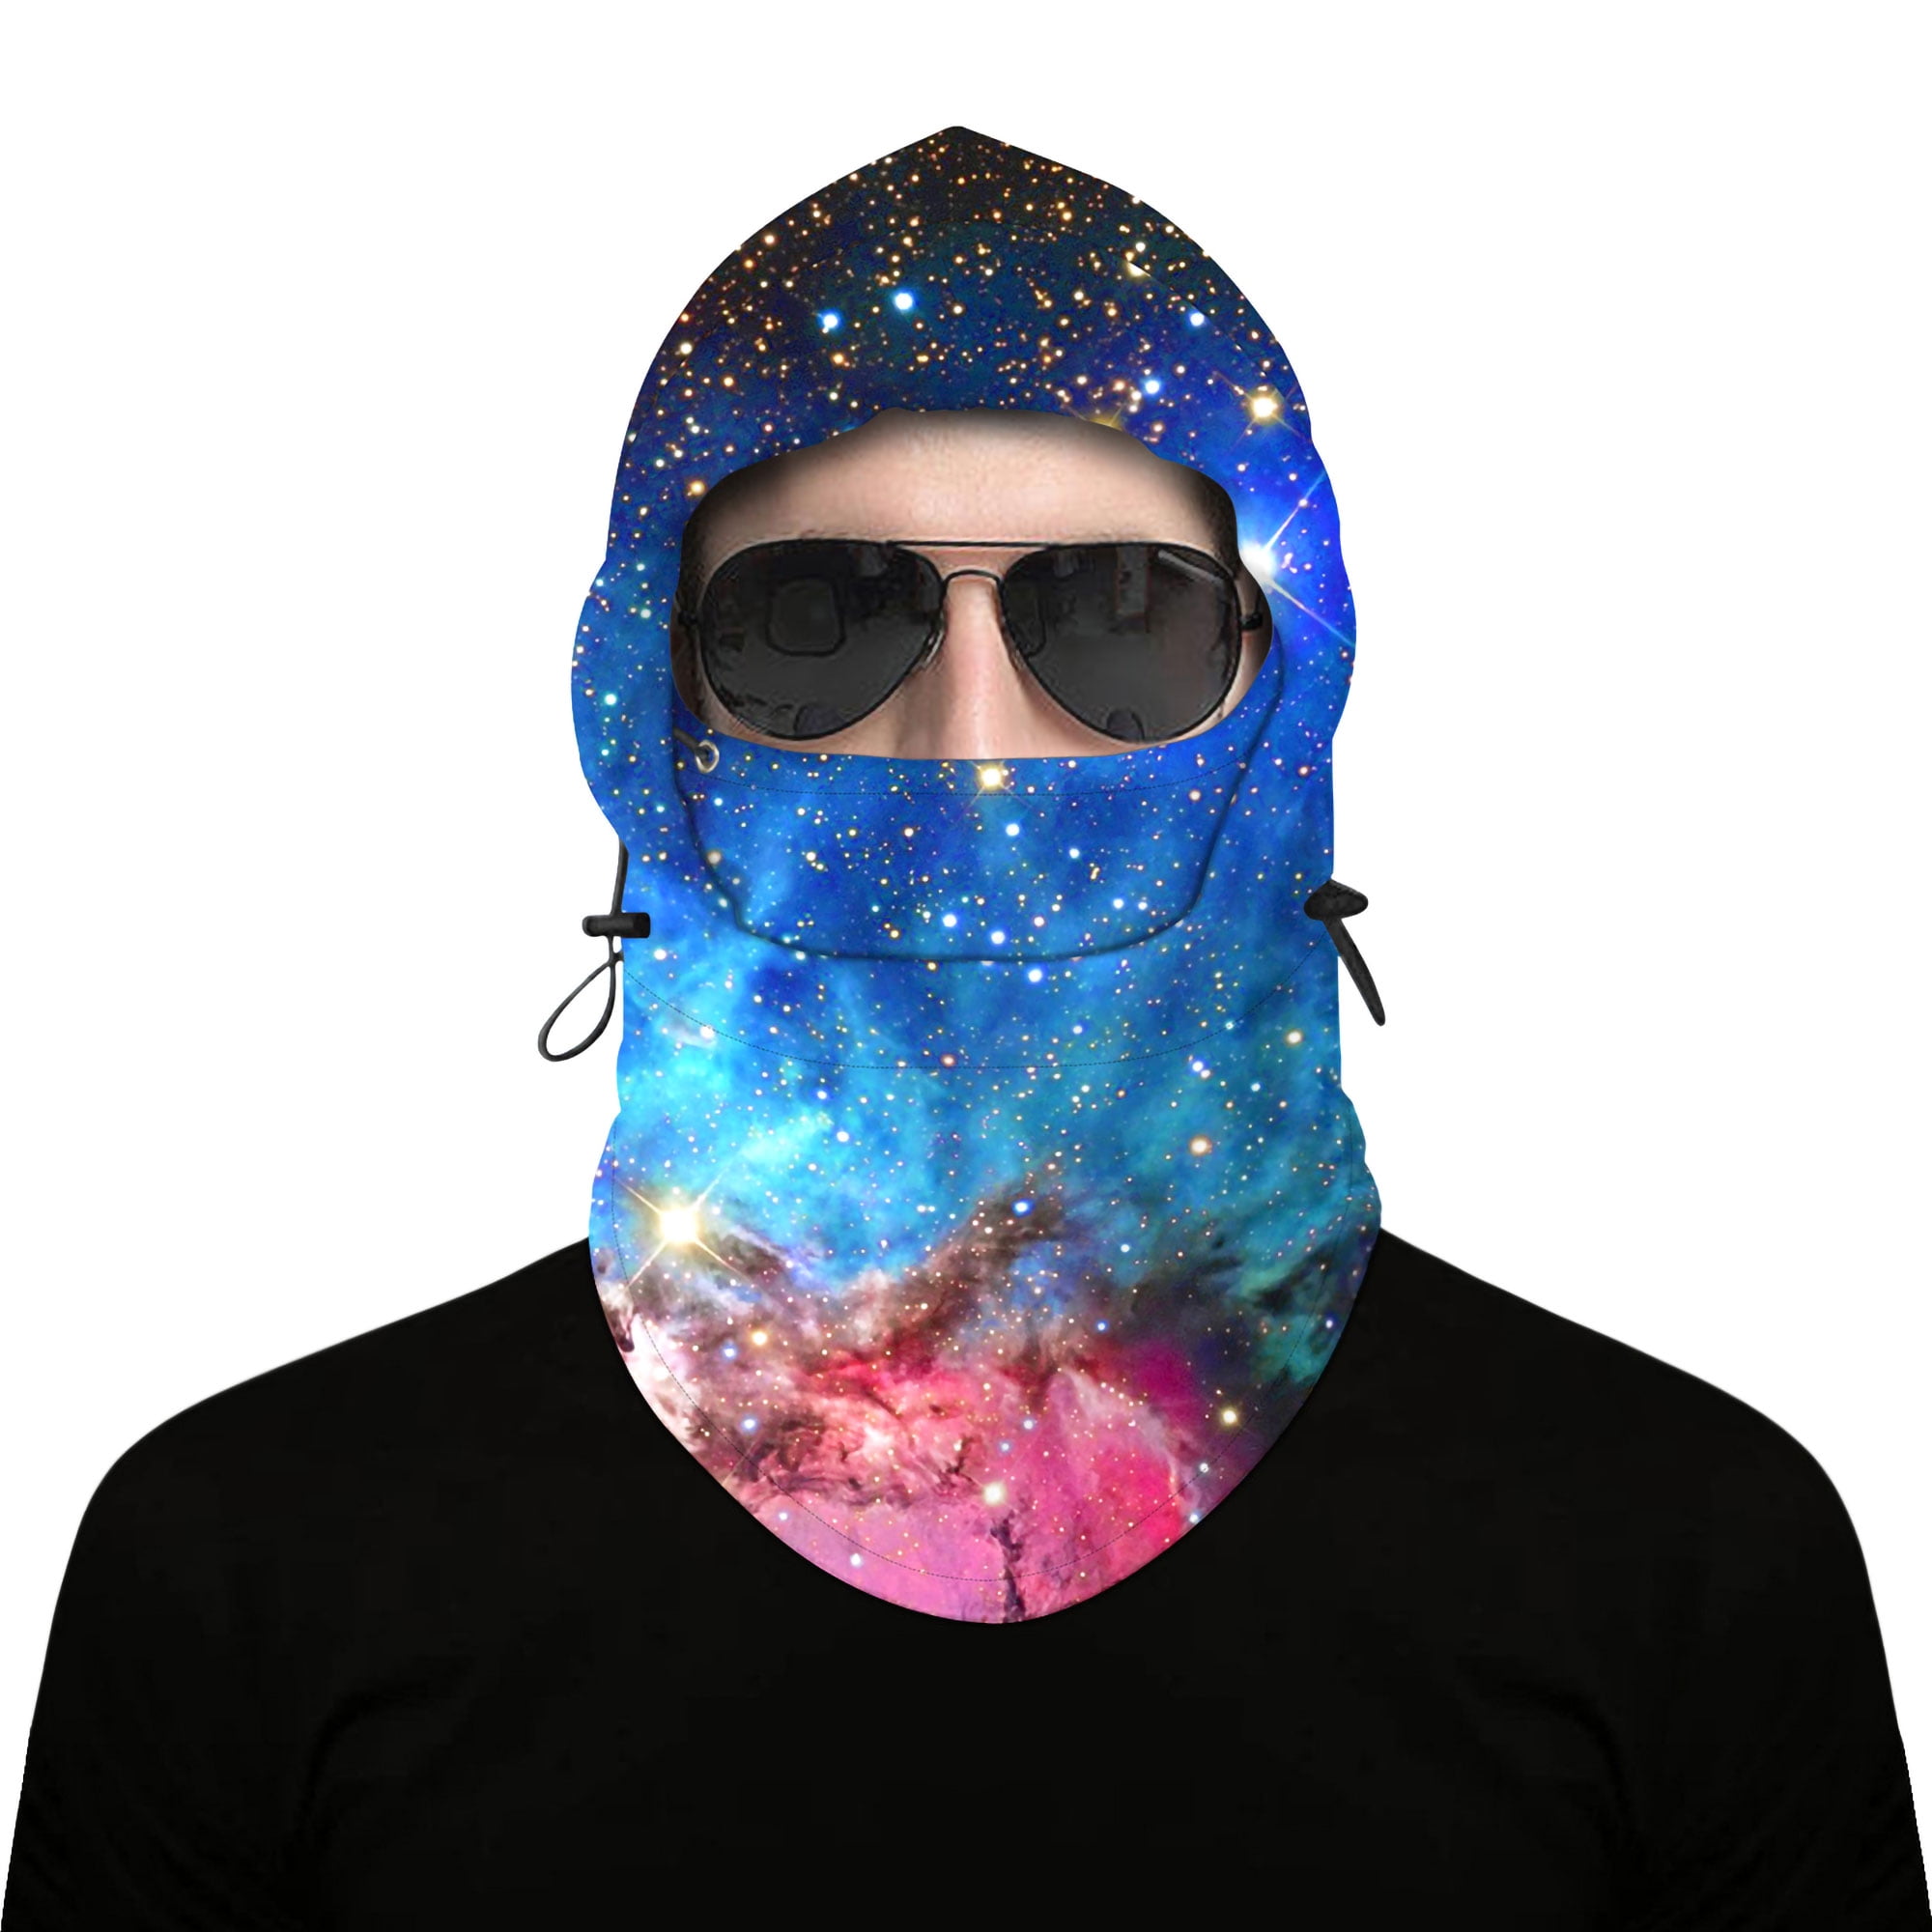 Details about   Adjustable Cooling Neck Gaiter Balaclava Bandana Face Mask Scarf Face Coverings 